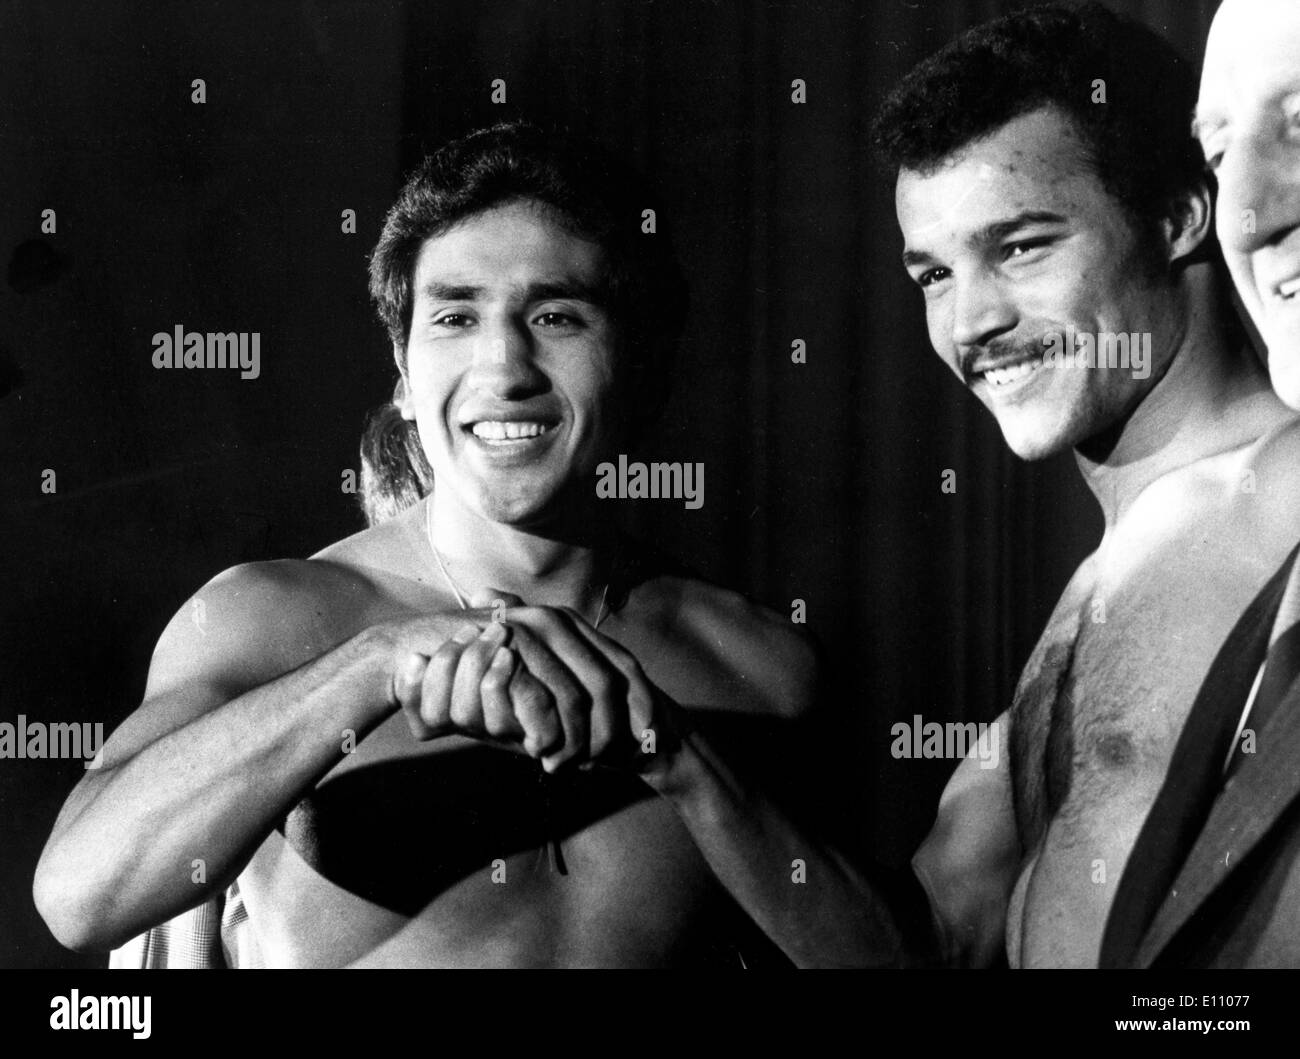 Britain's JOHN CONTEH (R) and JORGE AHUMADA of Argentina, shake hands at weigh in Oct 1, 1974; London, Wembley. Stock Photo